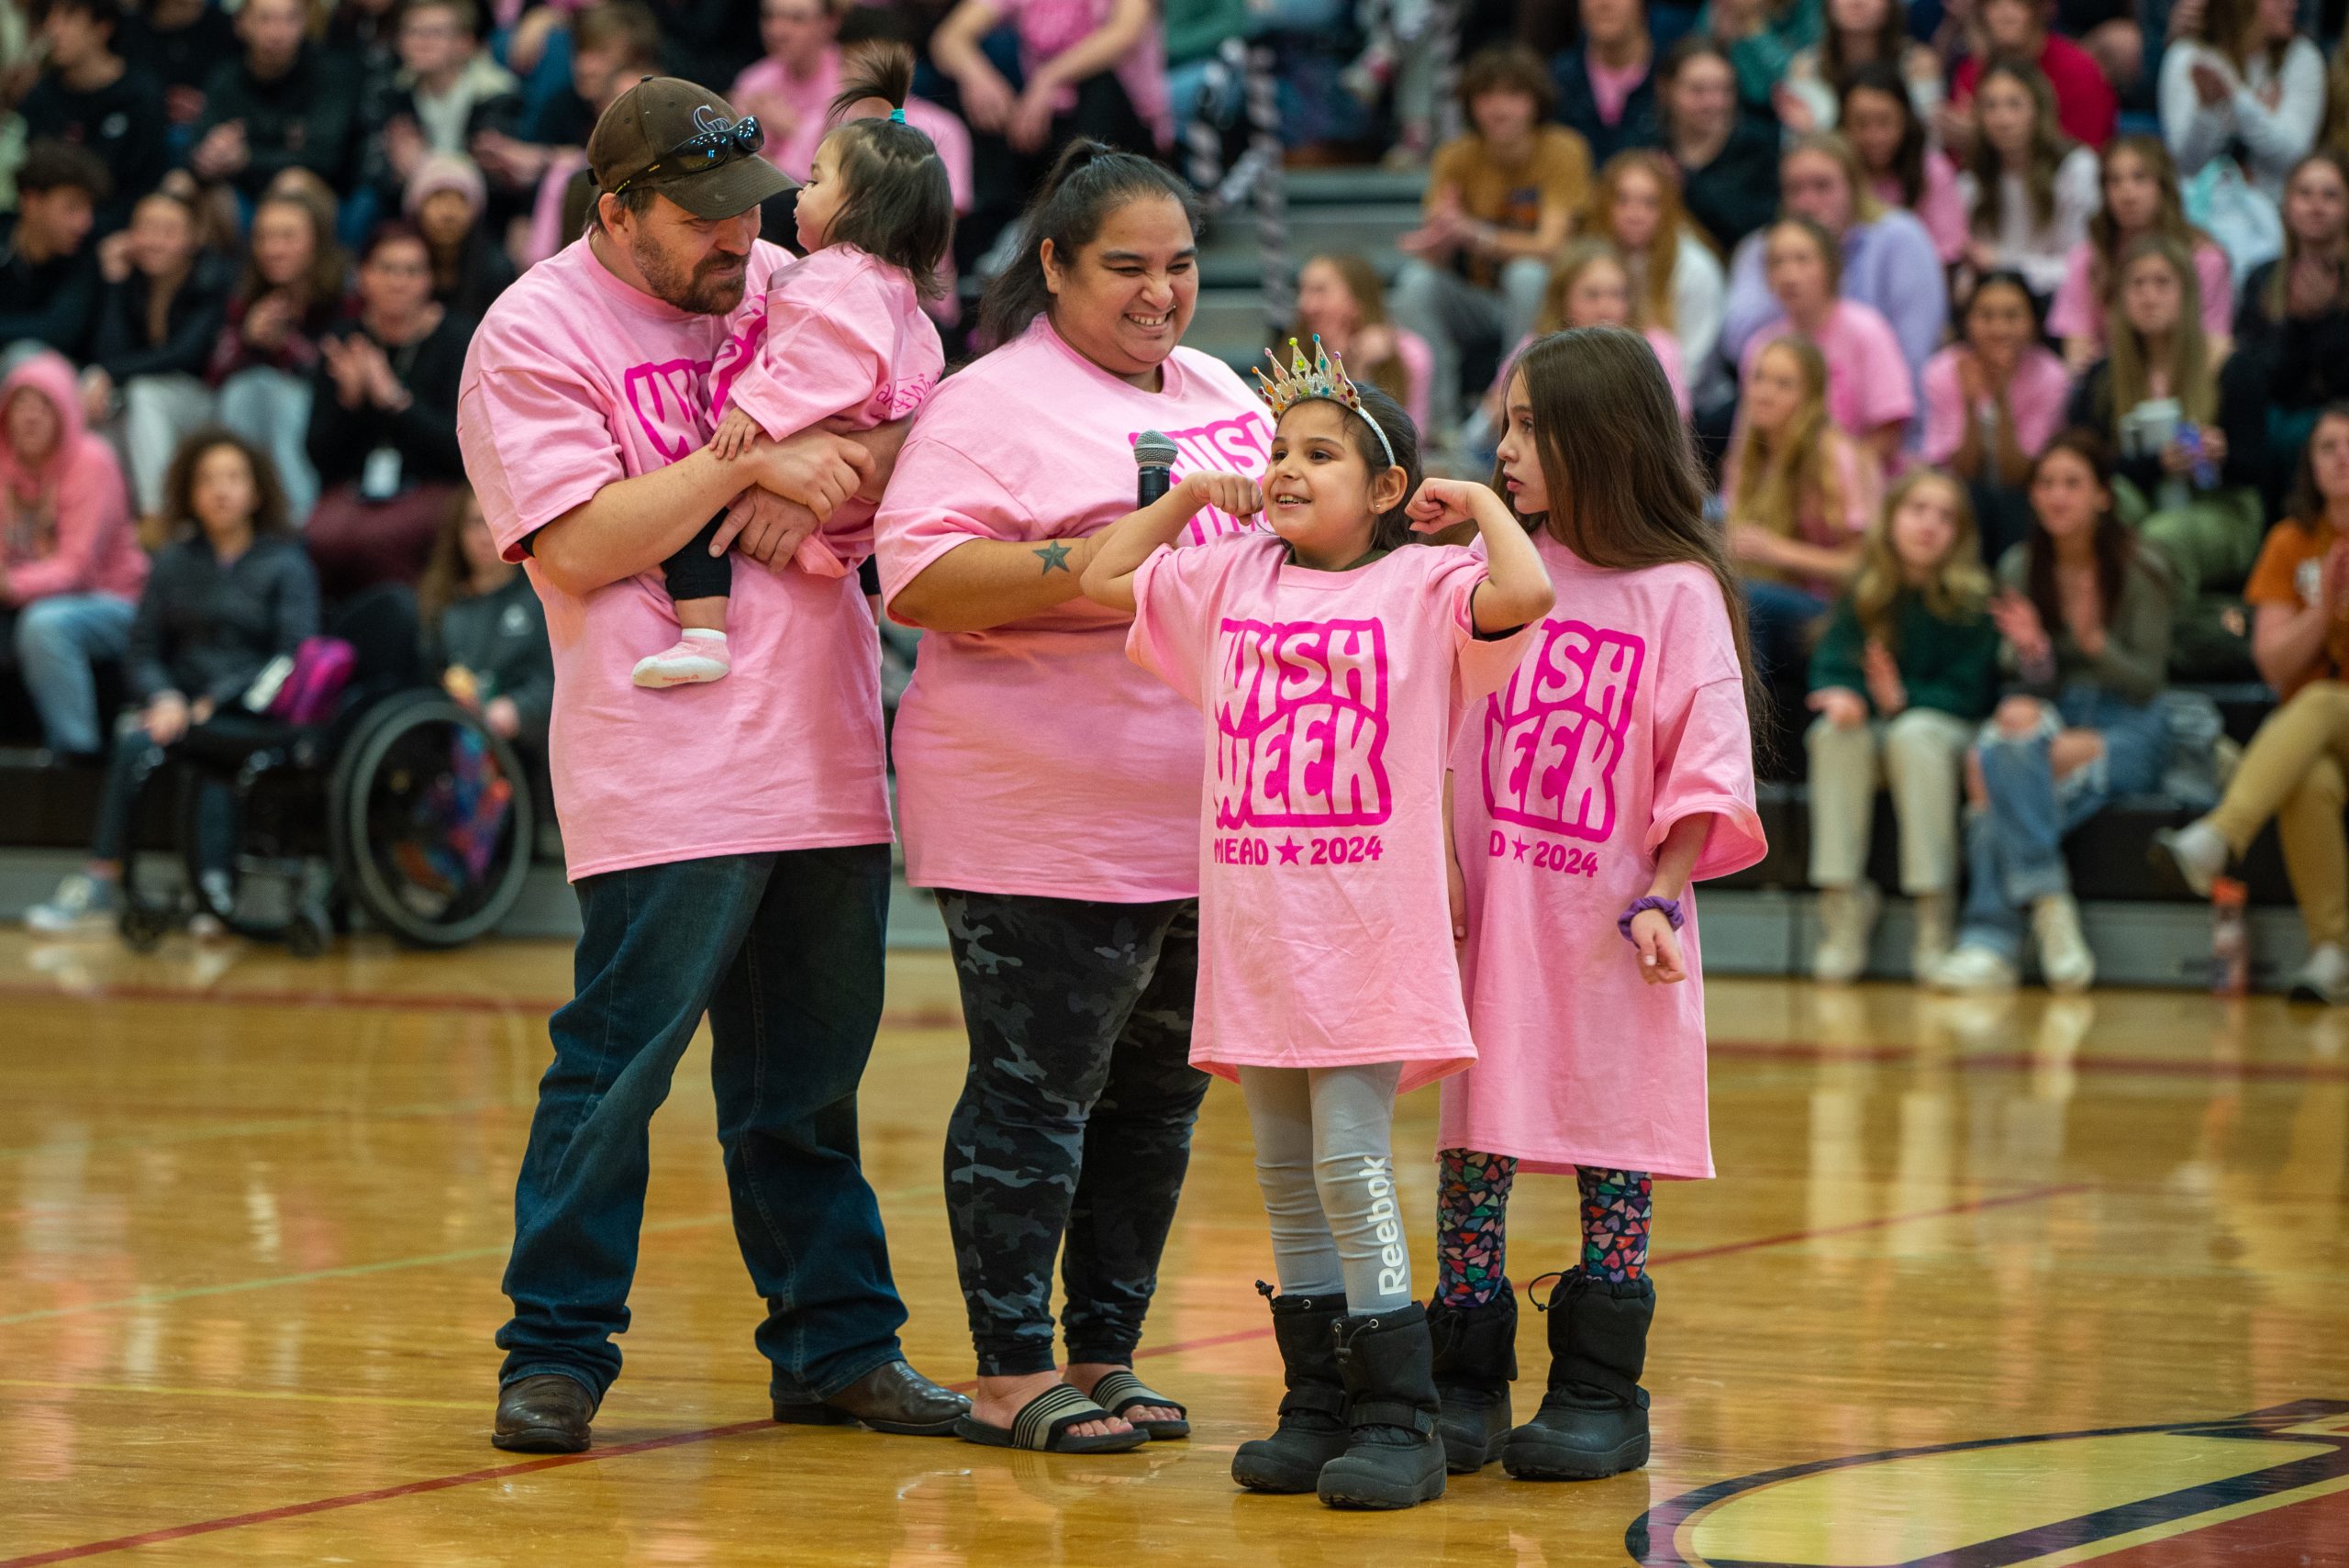 Make-a-Wish family standing in the gym at Mead High with a crowd of students on the bleachers blurred behind them. Dad is on the left holding a toddler, mom is next to him on the right, and the daughters are side by side next to her. They are wearing matching pink Wish Week 2024 t-shirts.